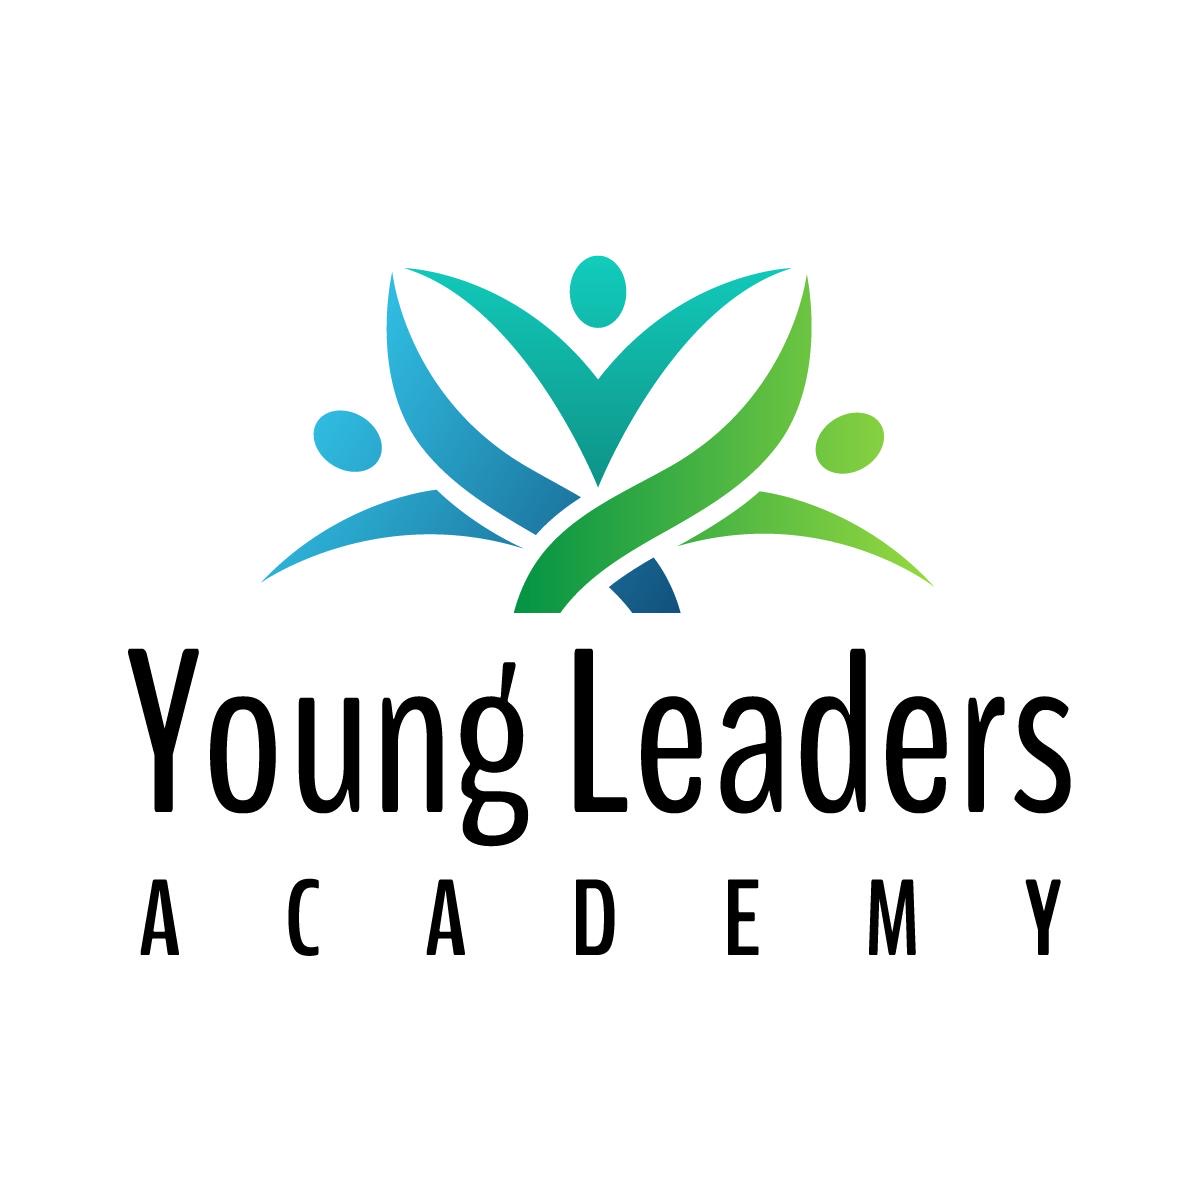      Young Leaders Academy              